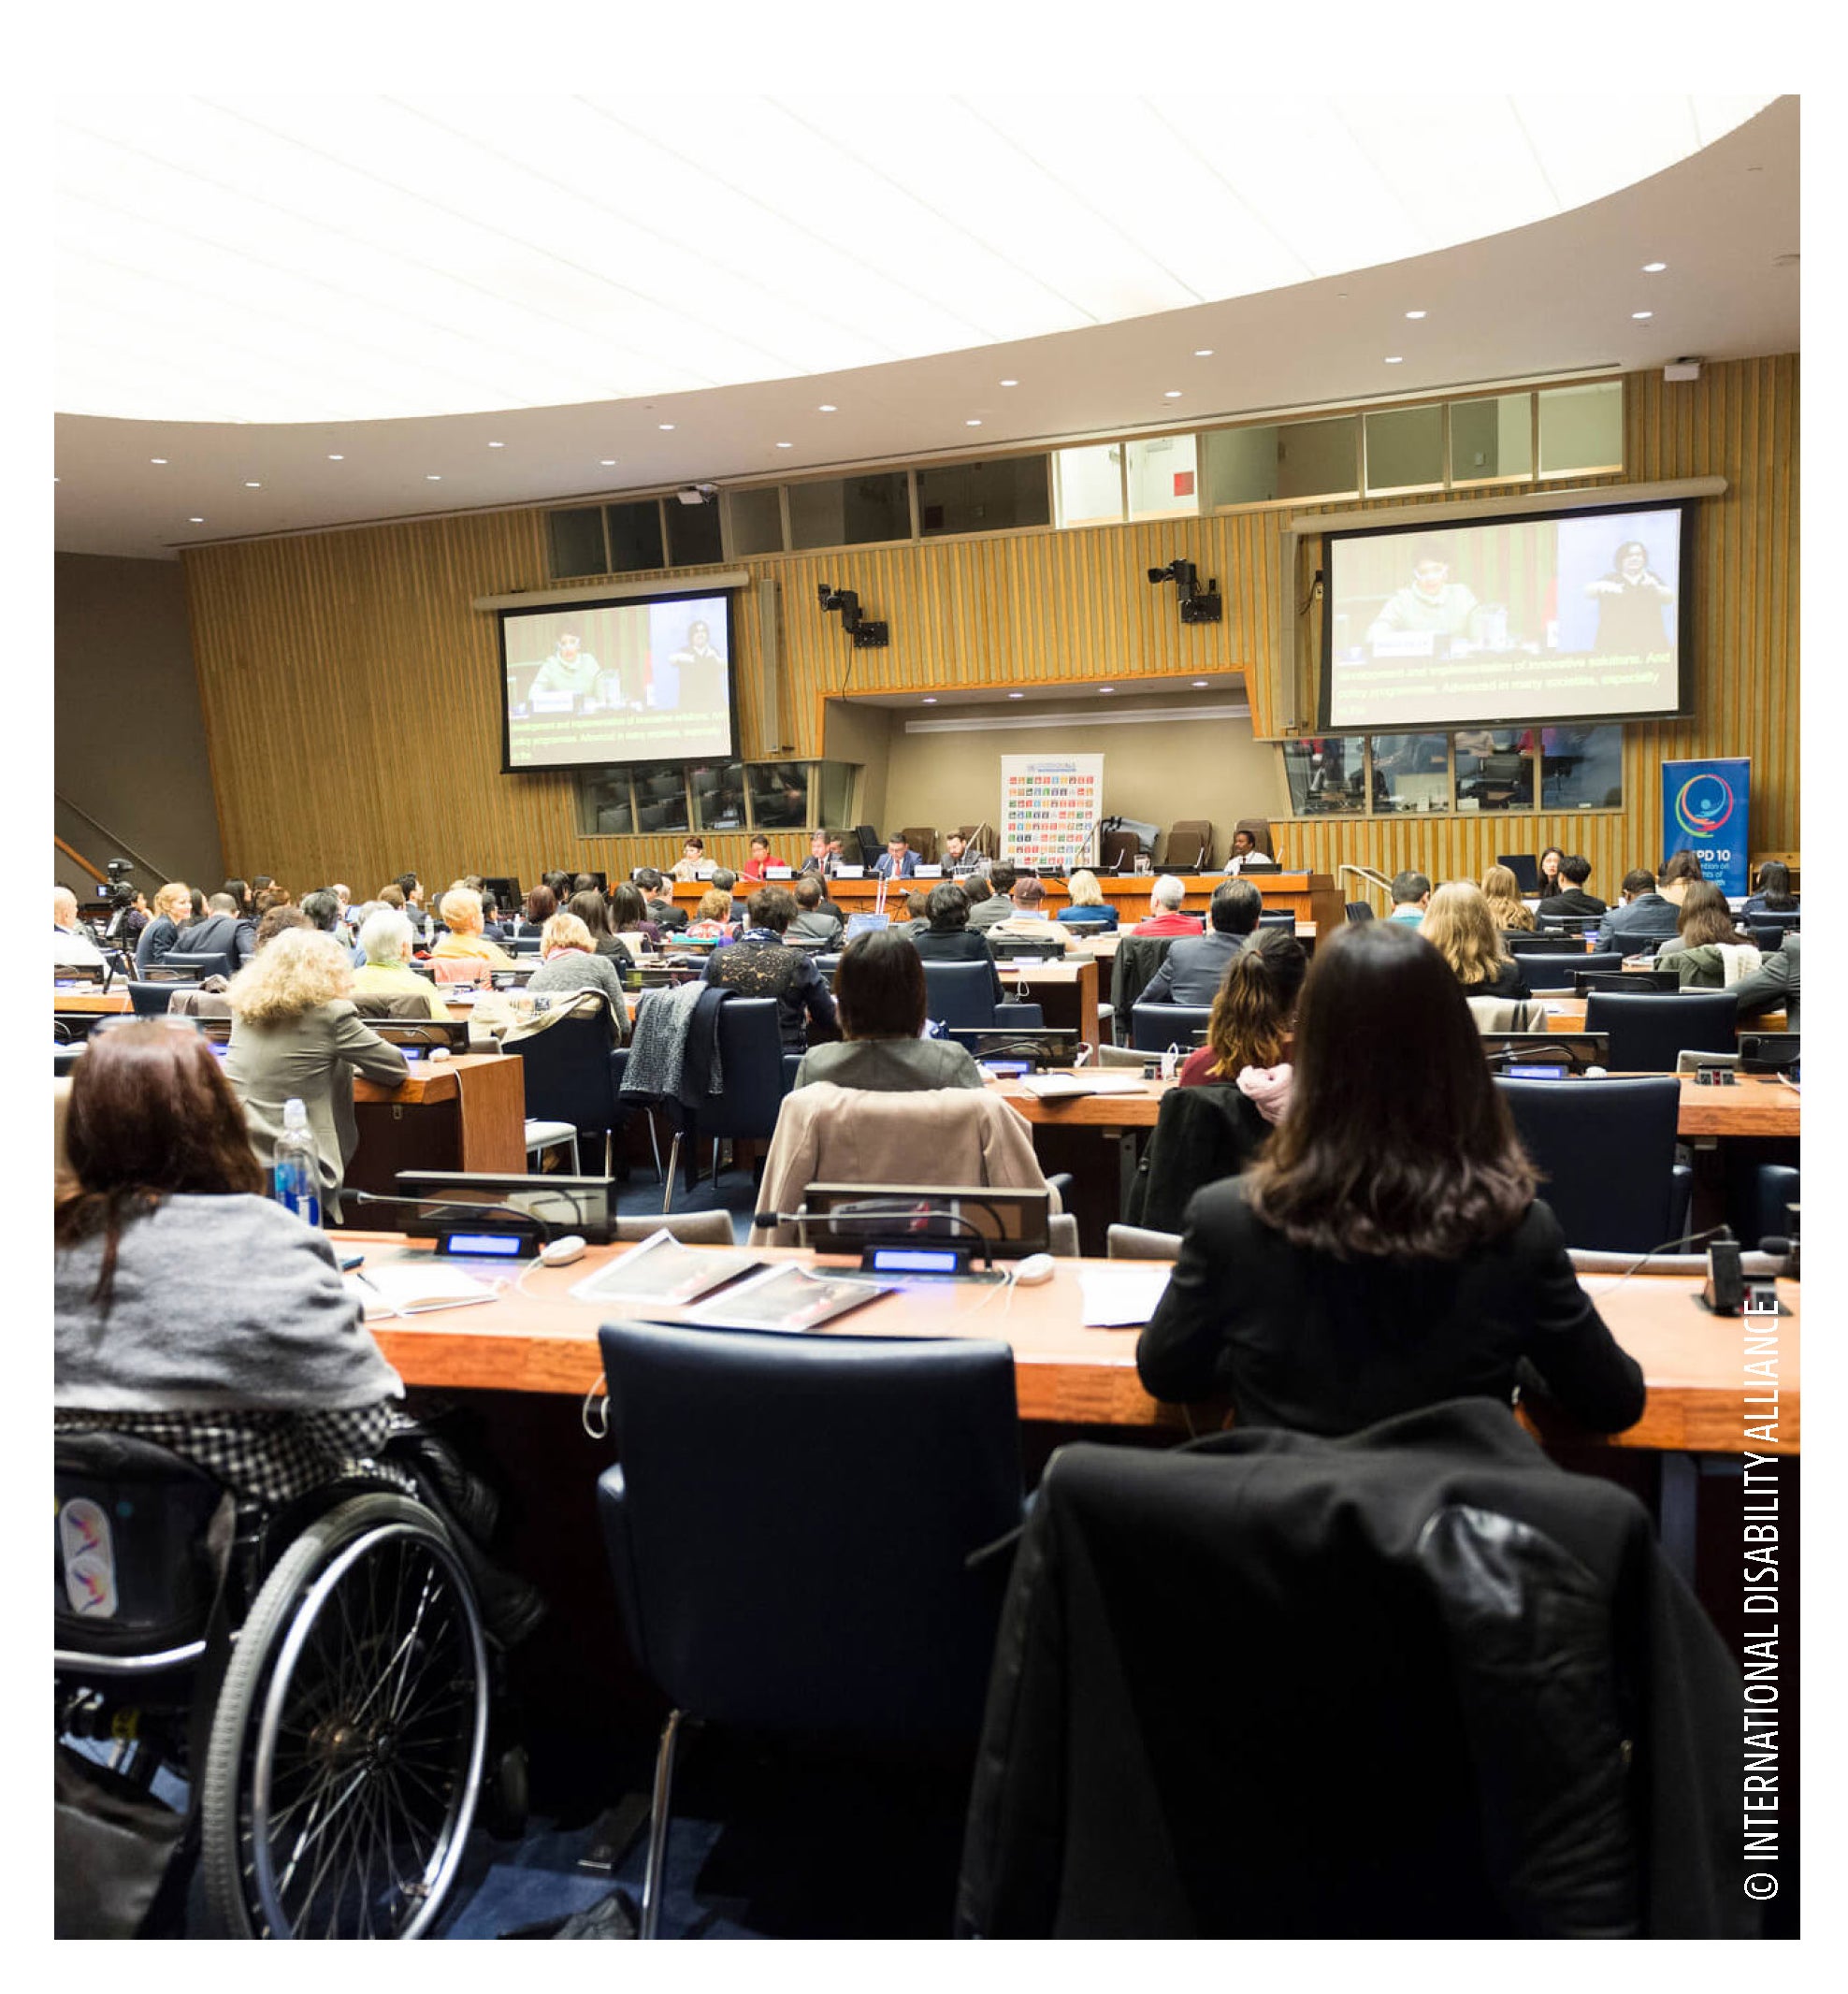 Public presentation of candidates to the United Nations Committee on the Rights of Persons with Disabilities